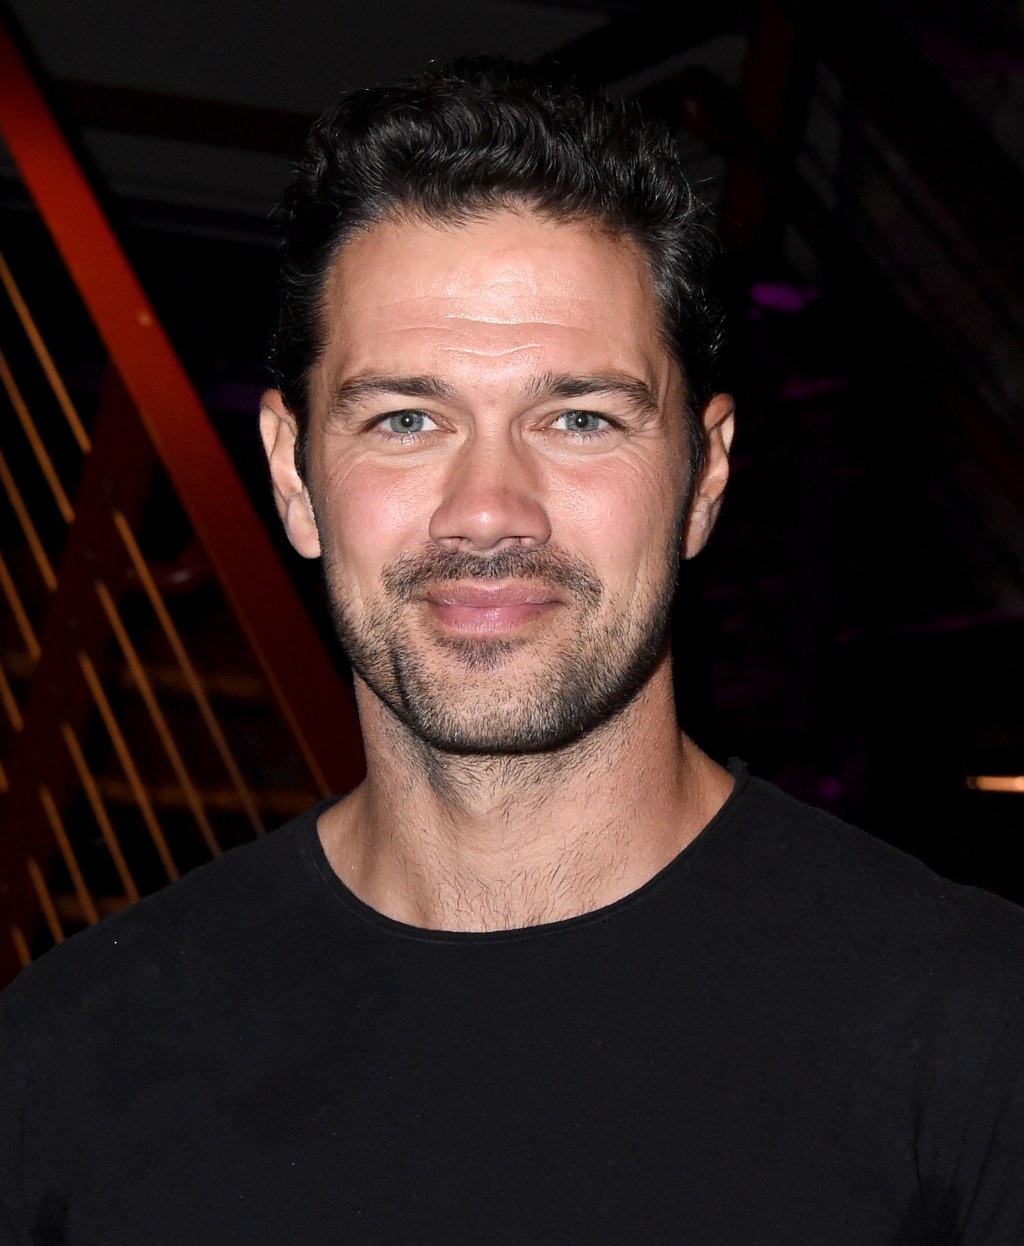 A portrait of a smiling Ryan Paevey with short, wavy black hair and light stubble. He wears a black t-shirt and stands in front of a blurred background with orange geometric patterns.